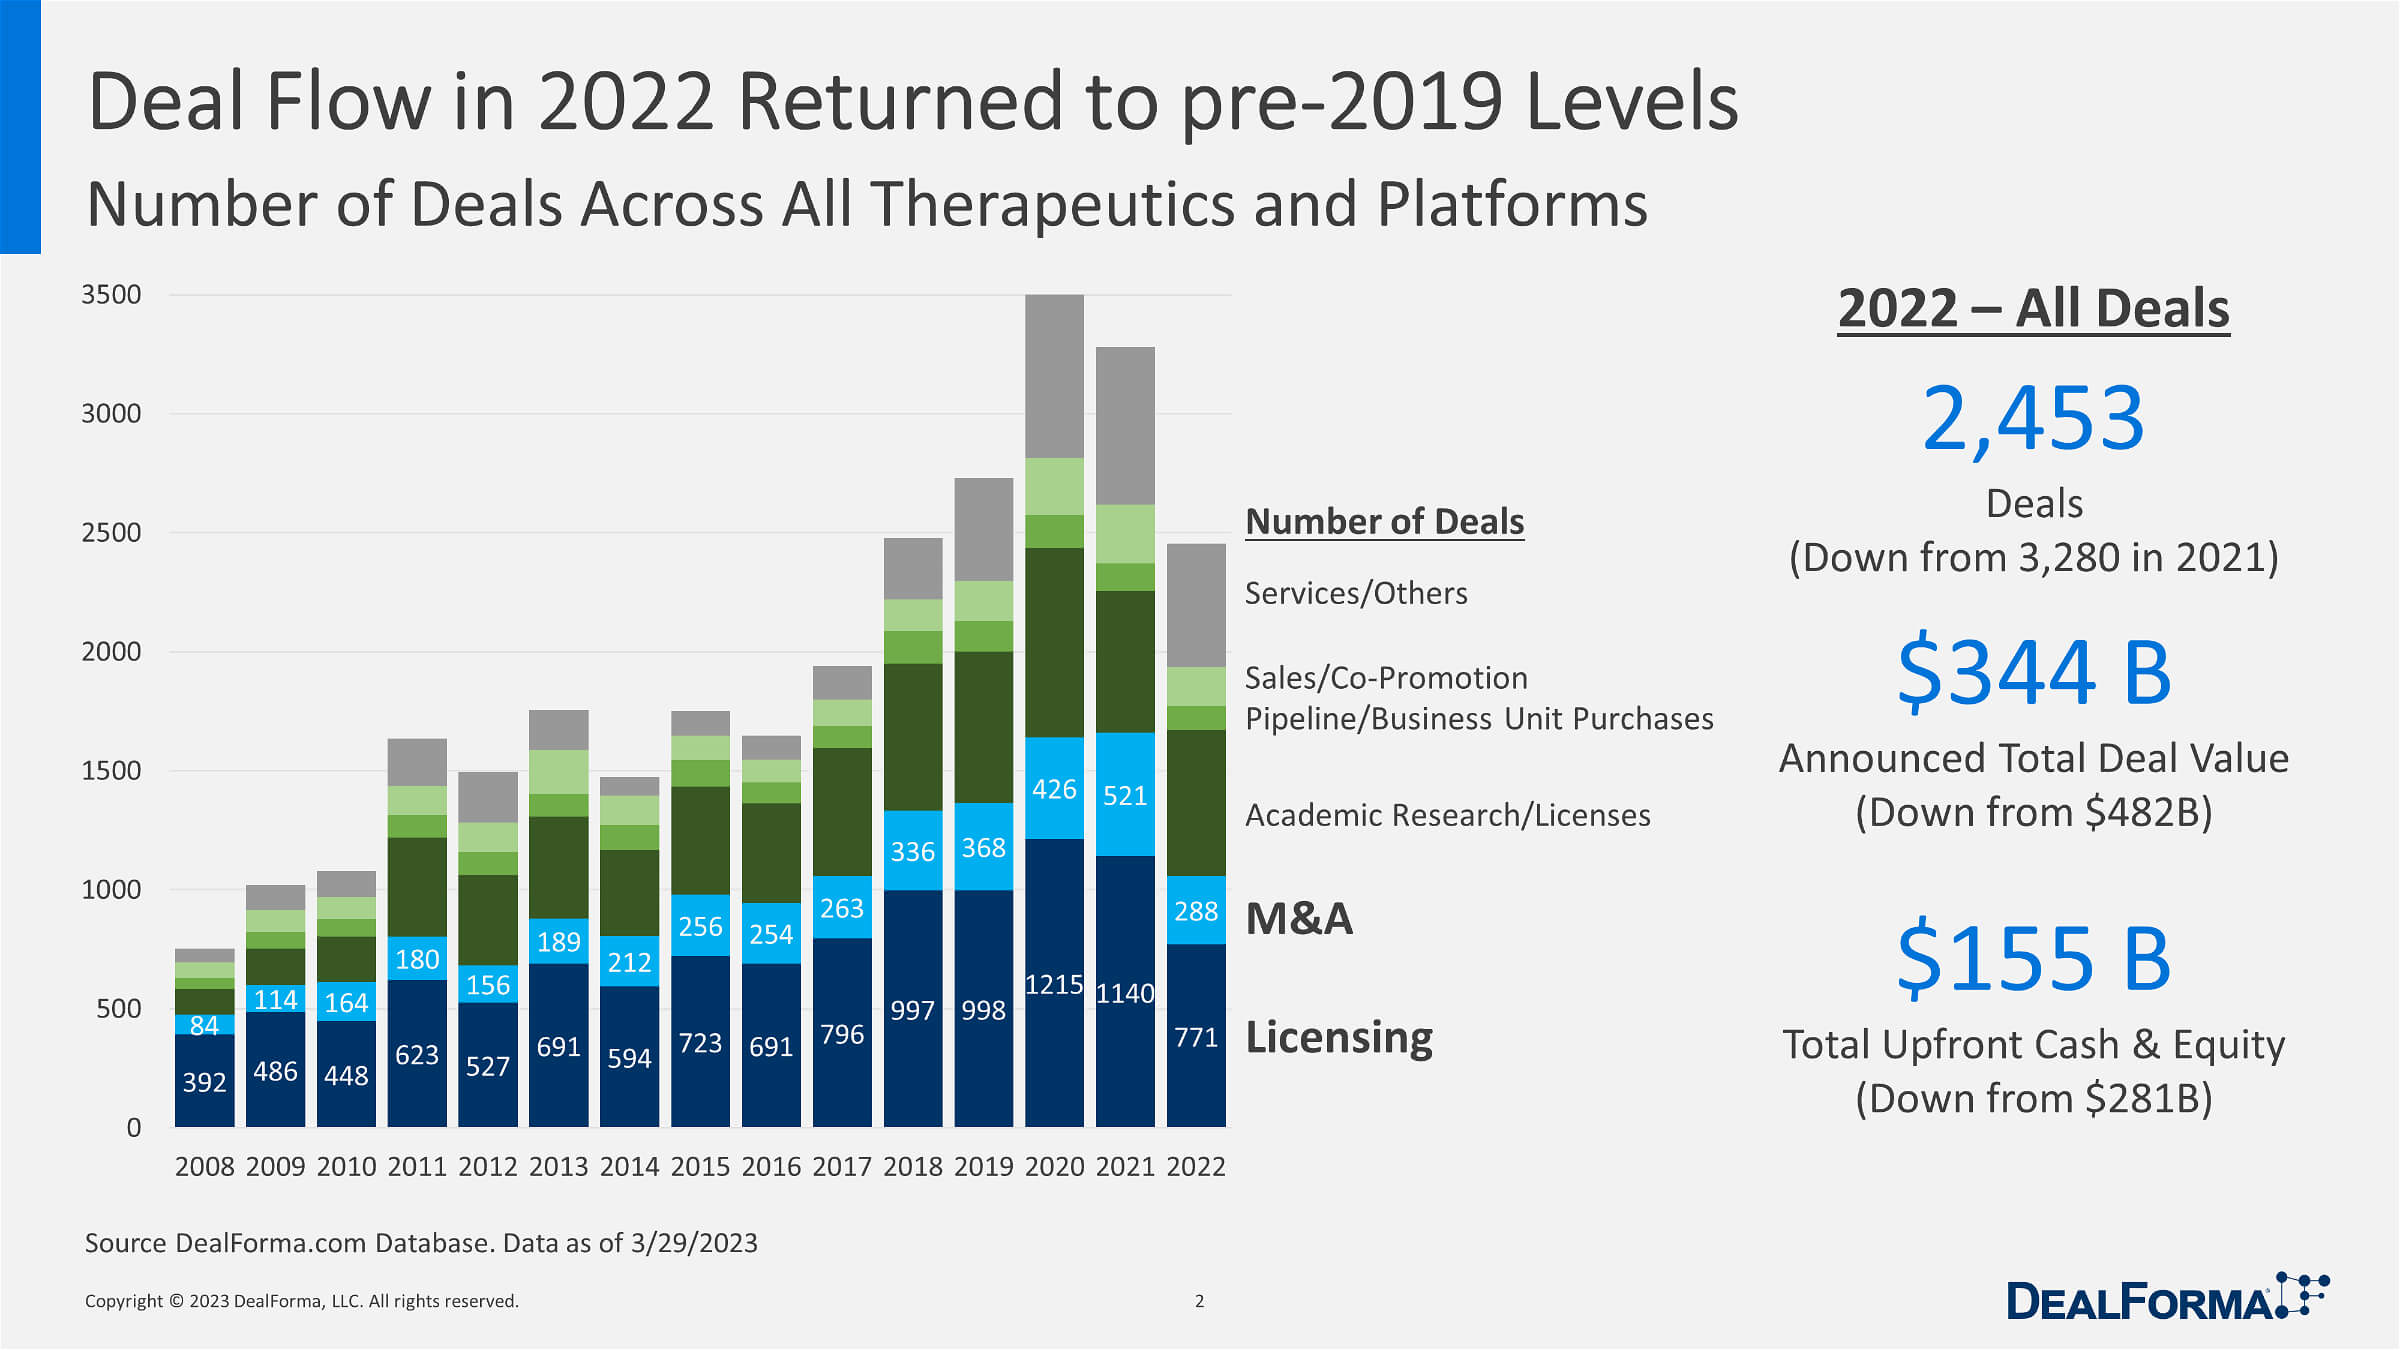 Deal Flow in 2022 Returned to pre 2019 Levels